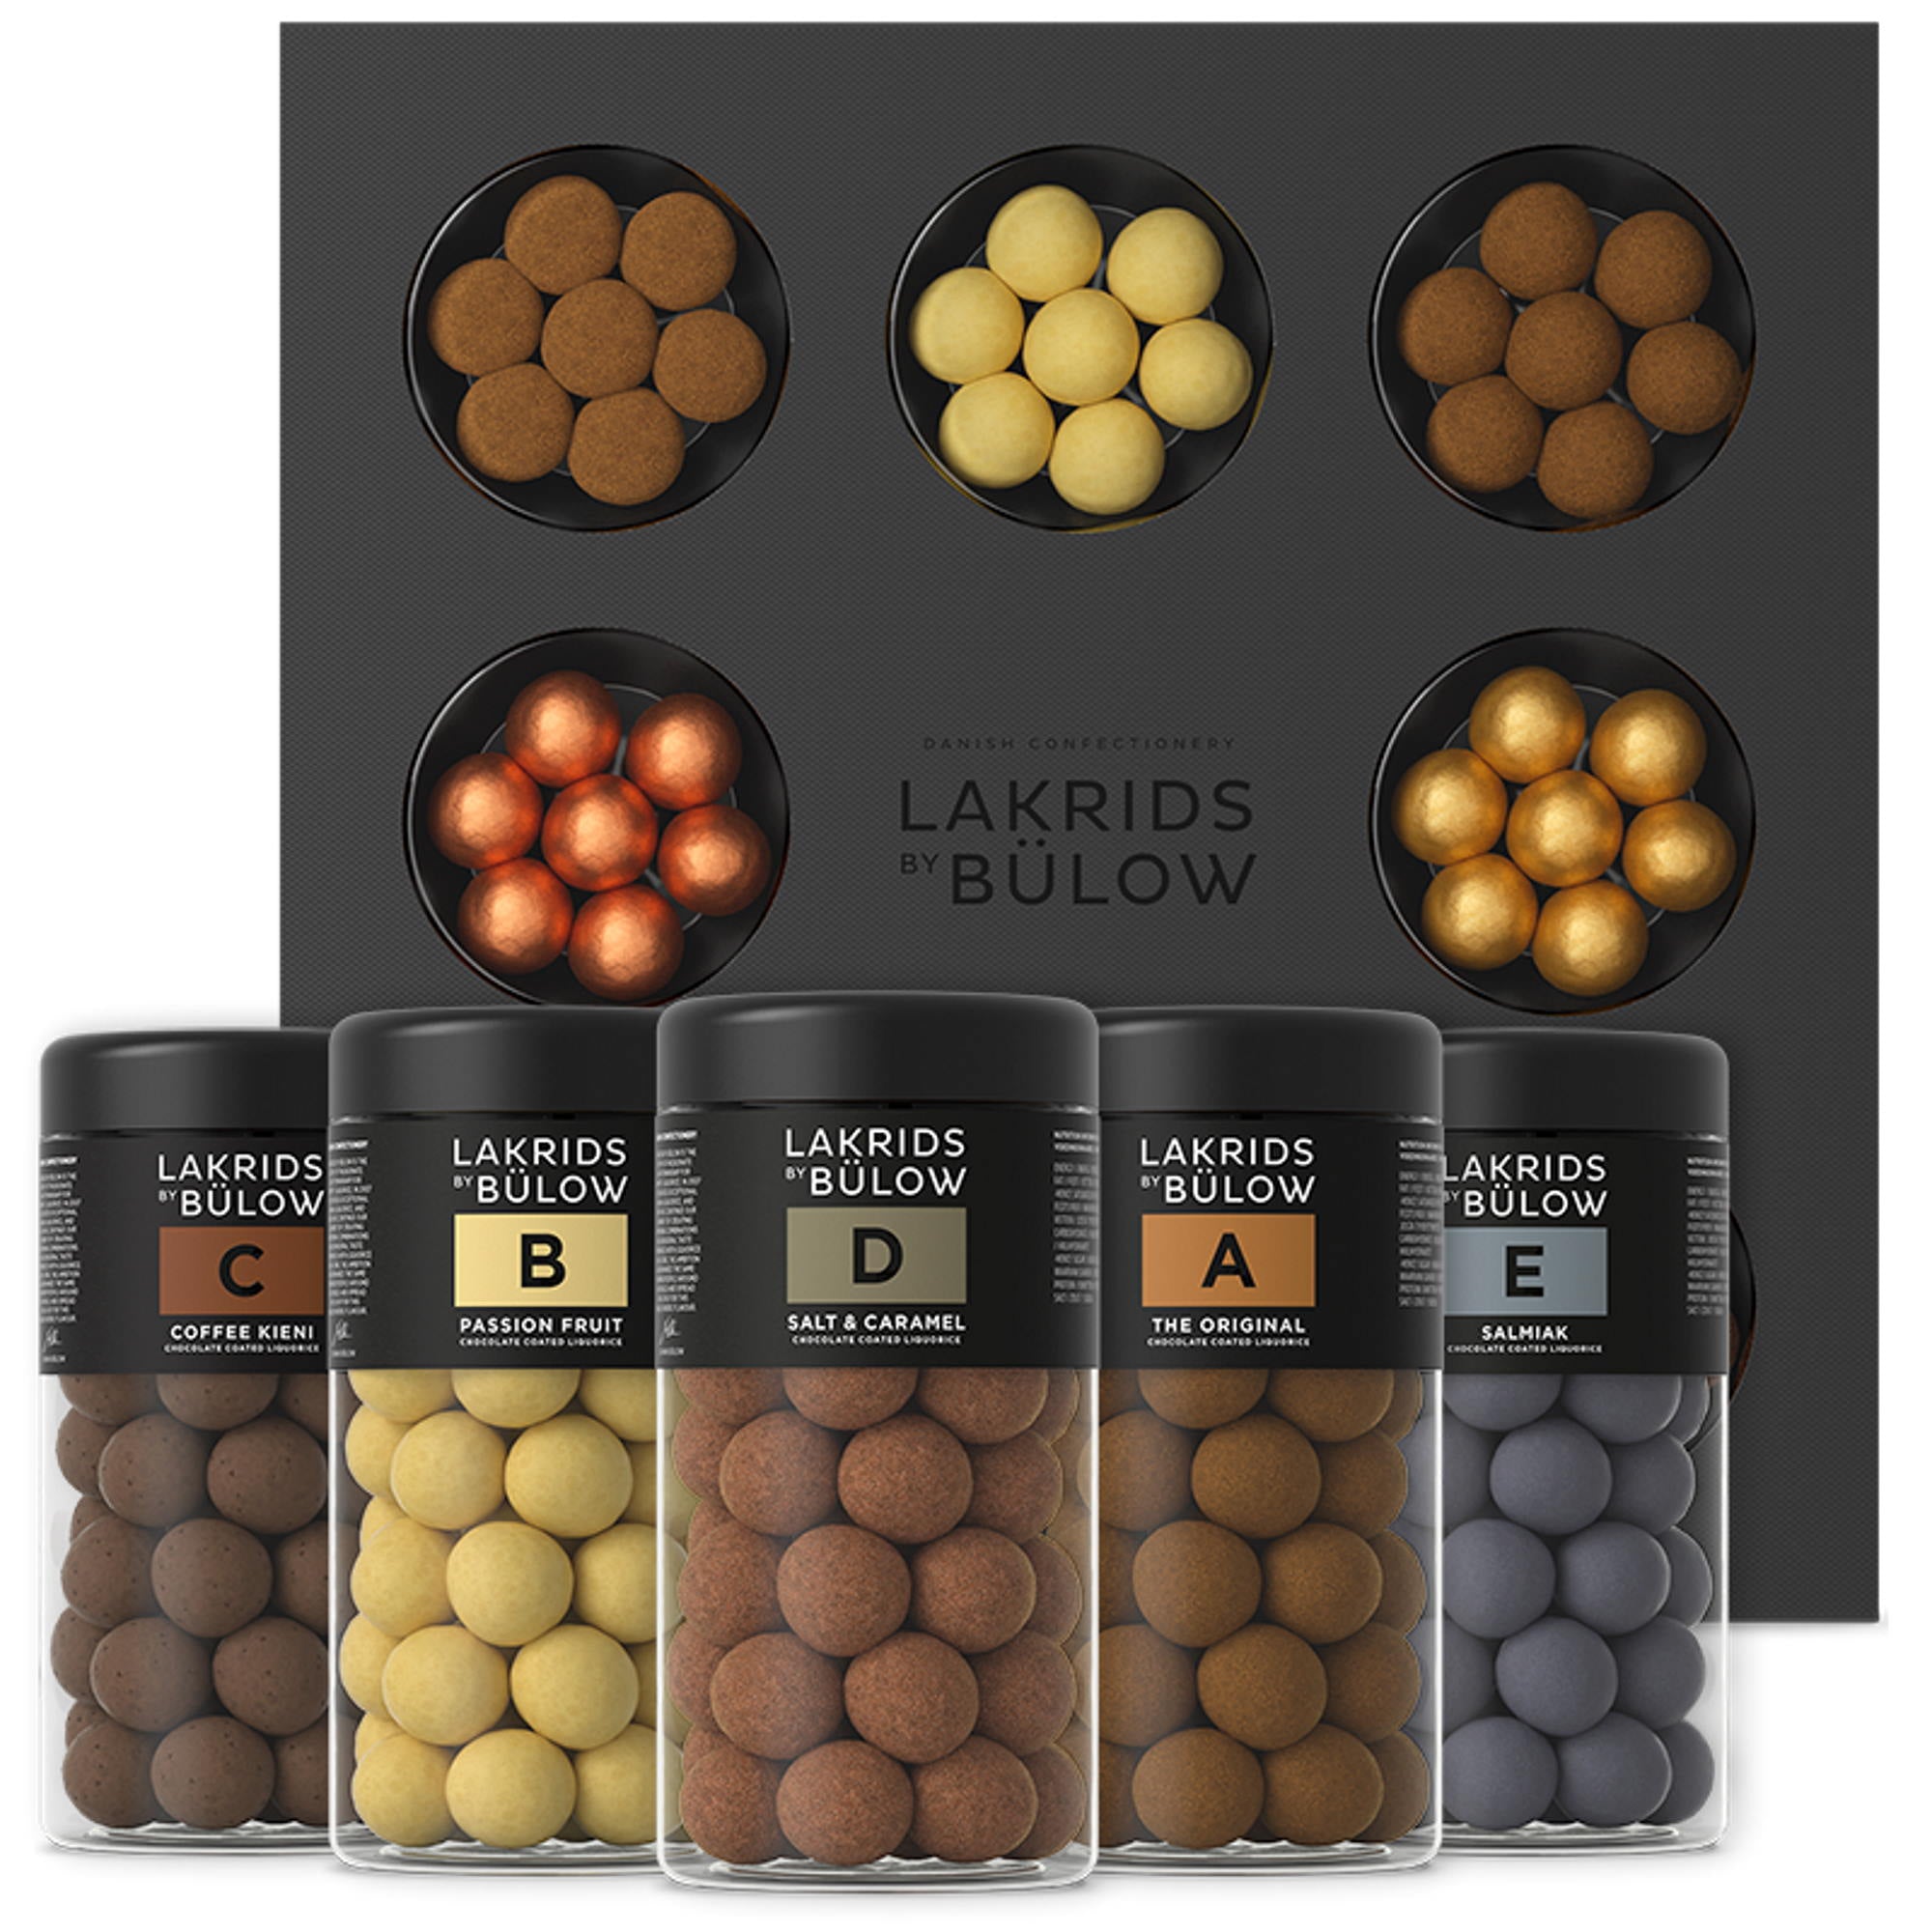 Lakrids by Bulow Special offers bundle offers and discounts